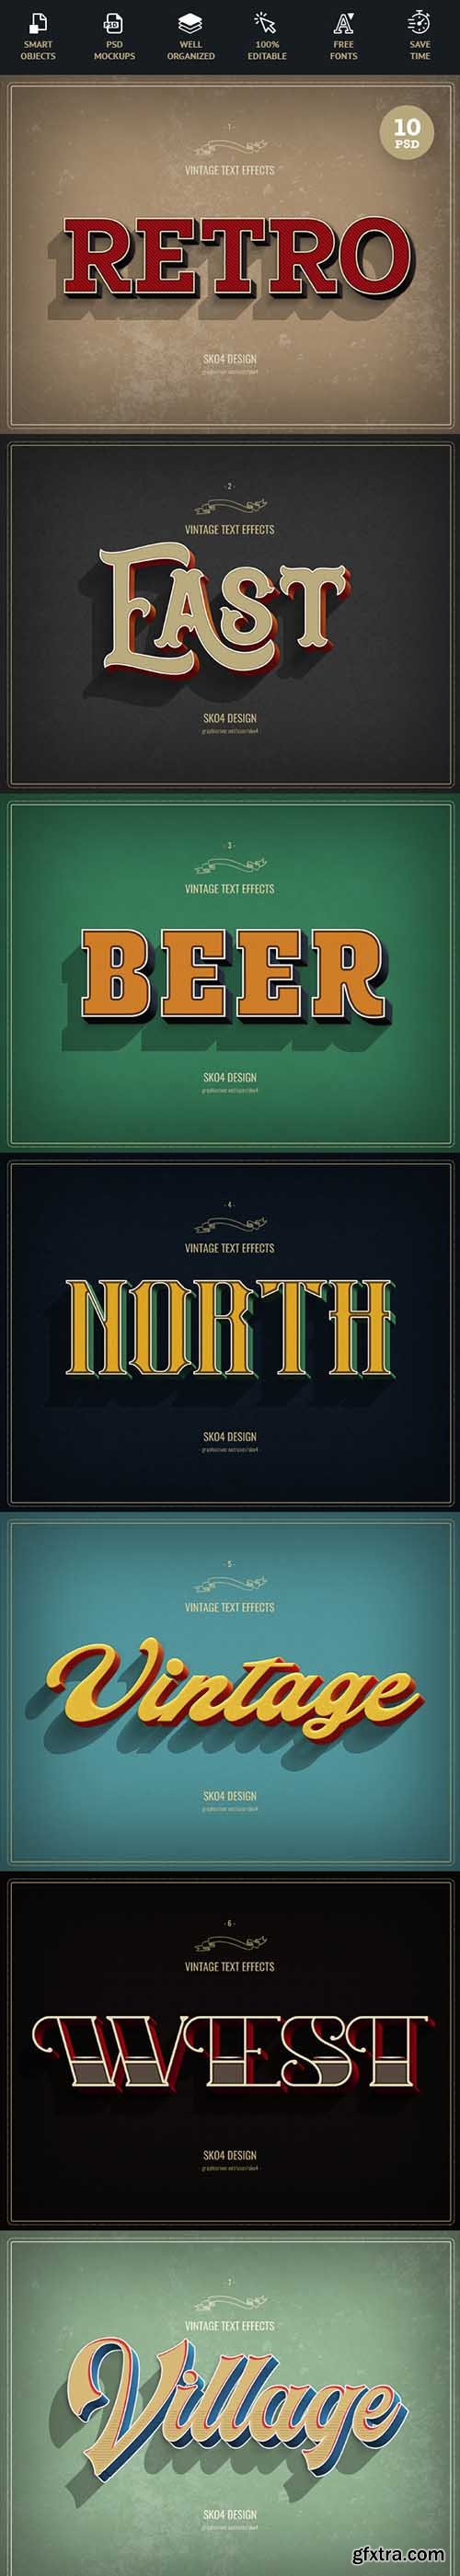 Graphicriver Retro Text Effects 22670888